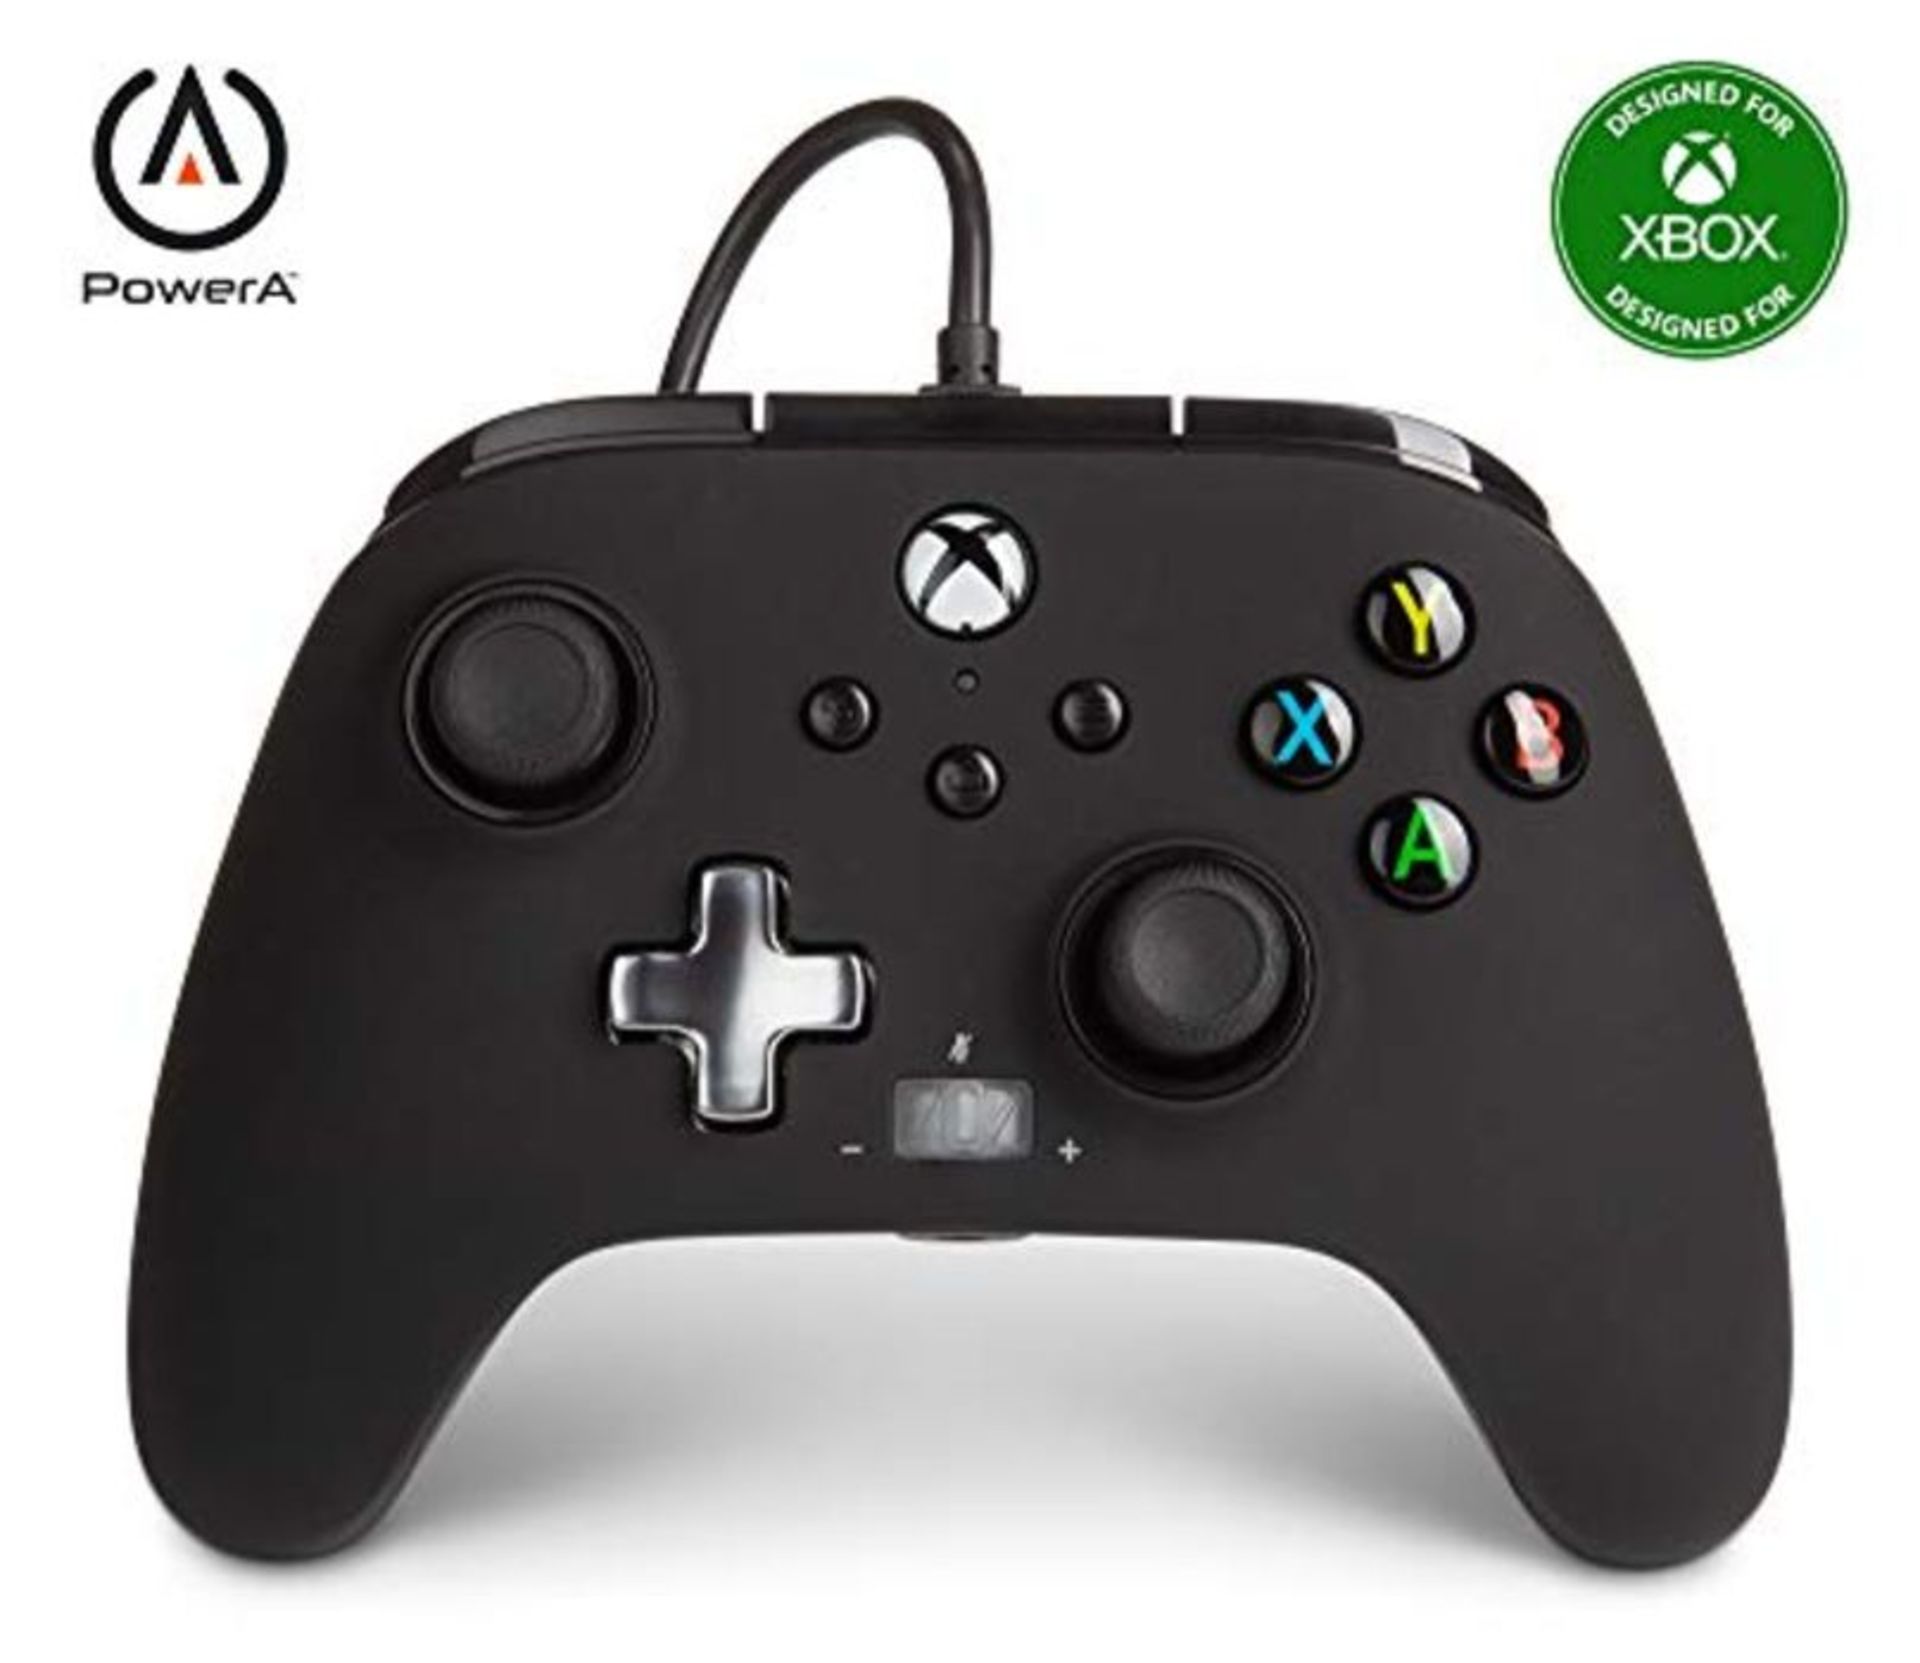 PowerA Enhanced Wired Controller for Xbox - Black Gamepad, Wired Video Game Controller